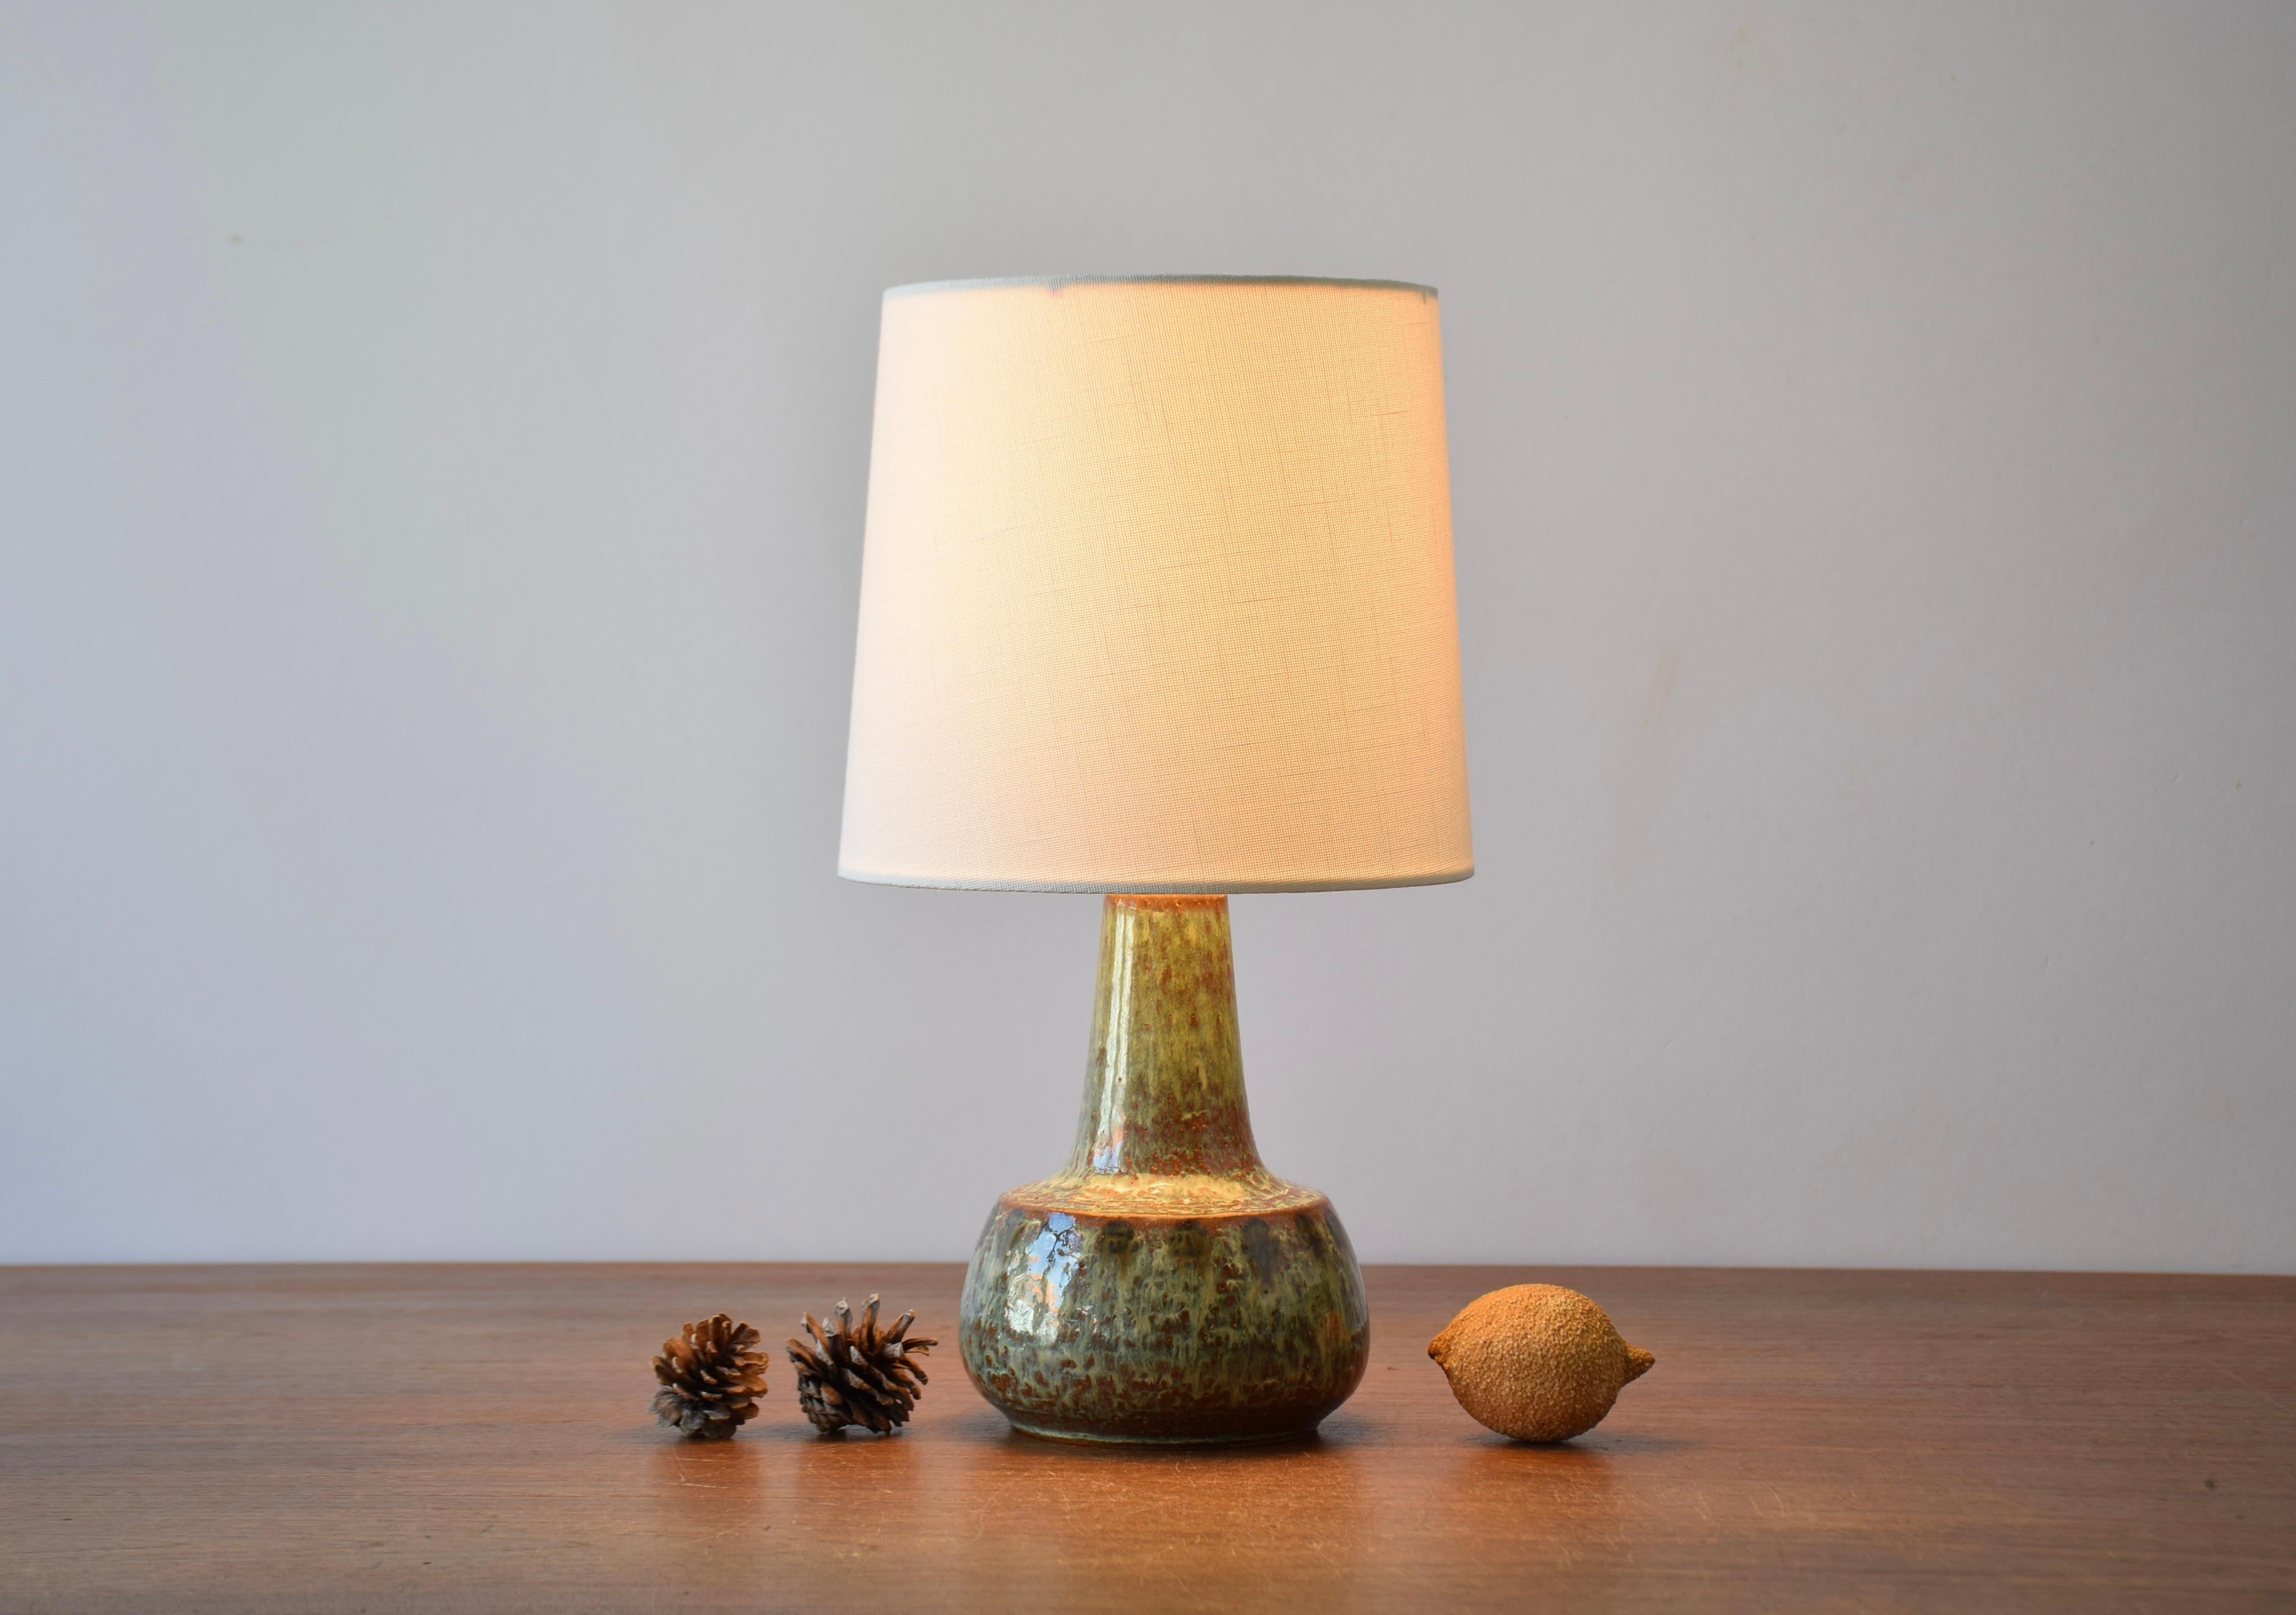 Mid-century Danish stoneware bedside lamp by Søholm Stentøj, Denmark. Made circa 1960´s.
The handmade lamp is decorated with a glossy brown and green glaze in different shades.

Included is a new lamp shade designed and made in Denmark. It is made